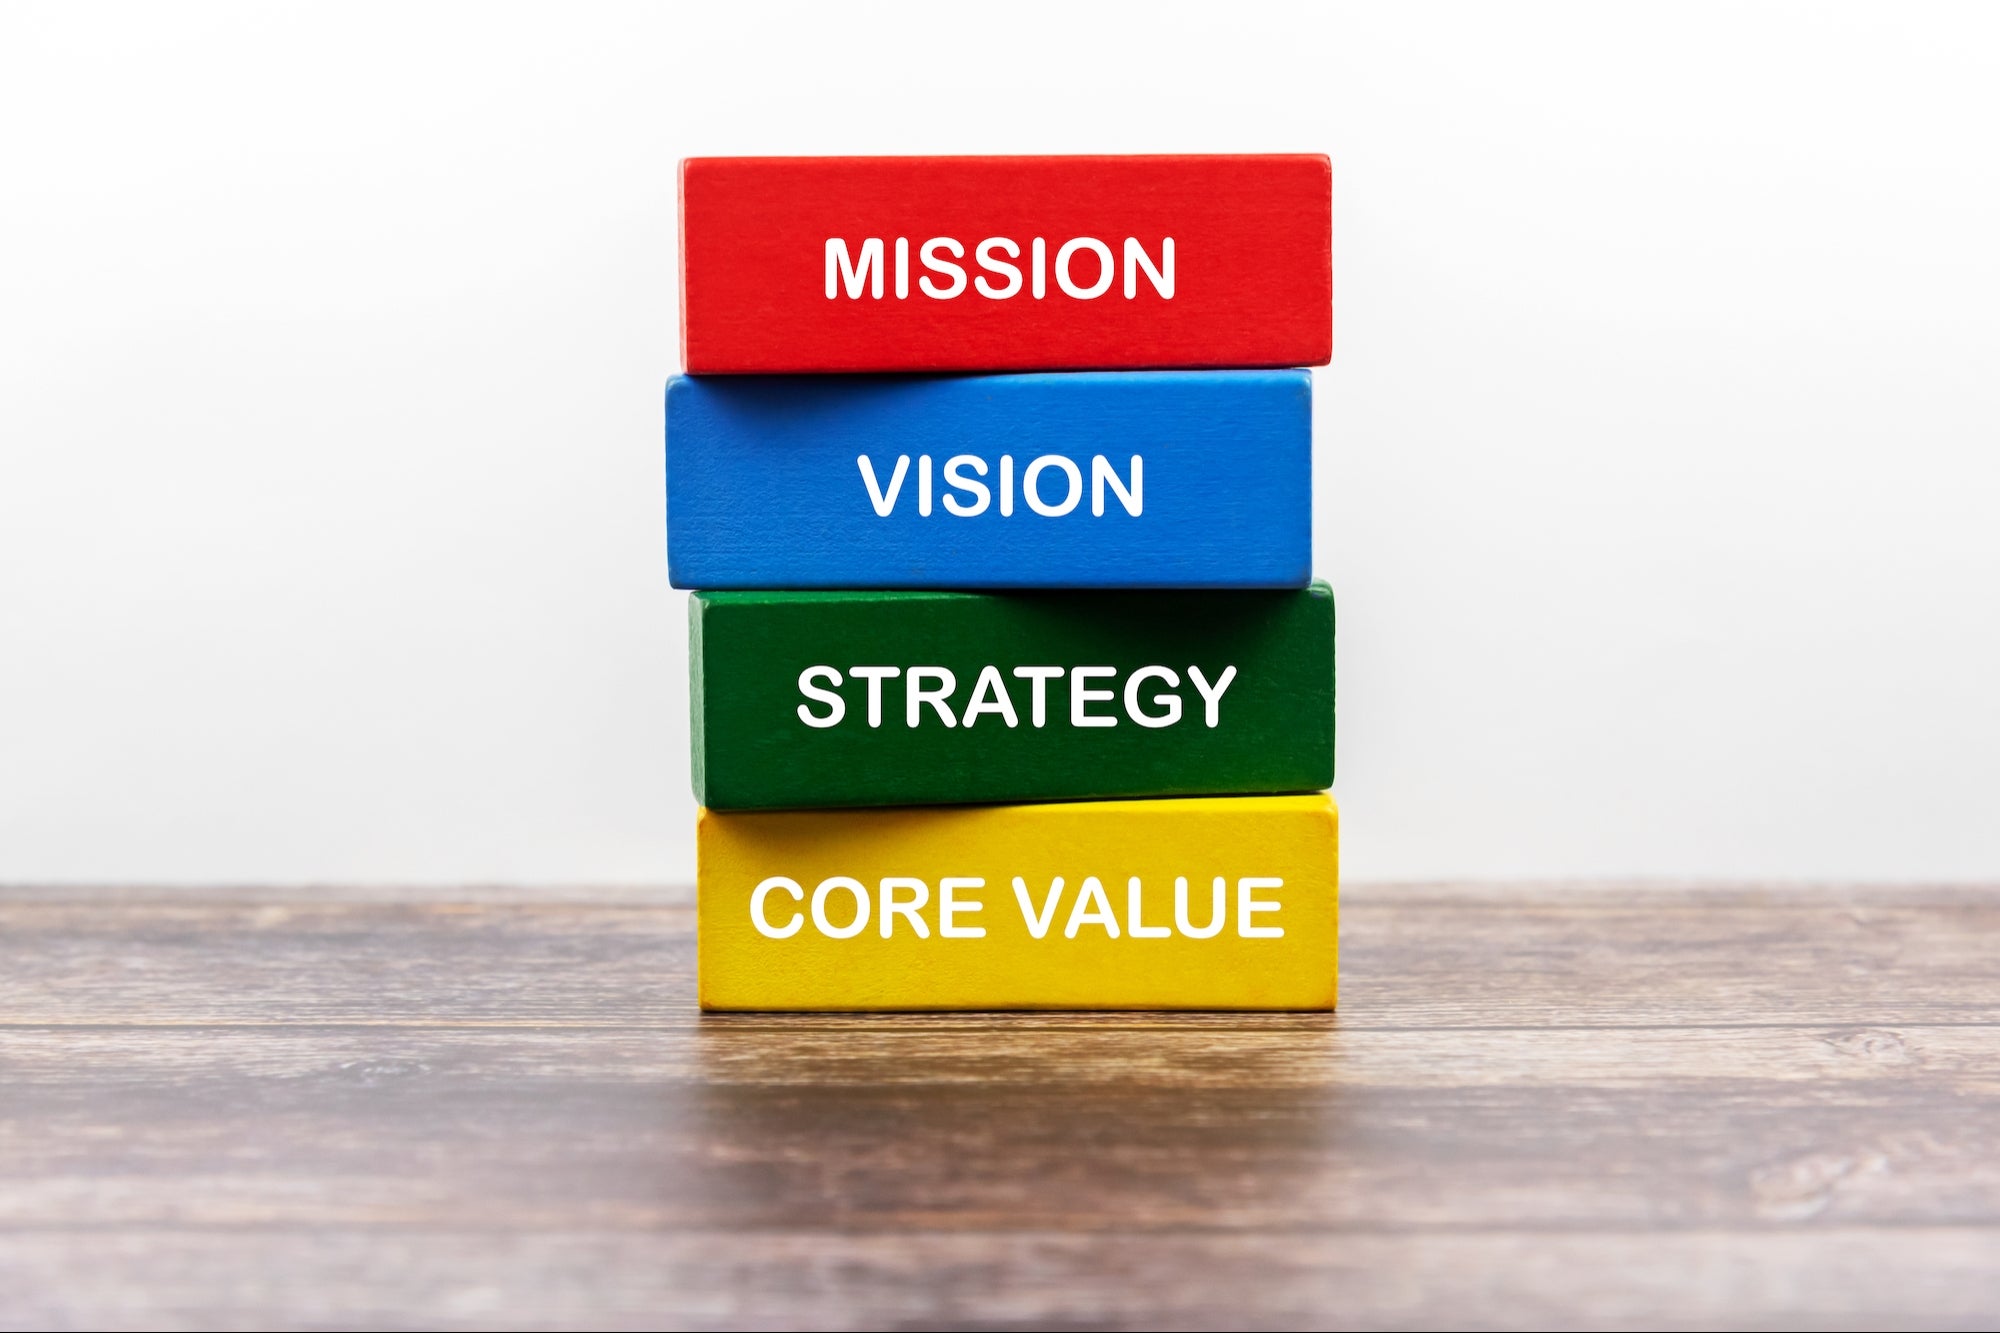 4 Reminders To Help Define Your Company's Values